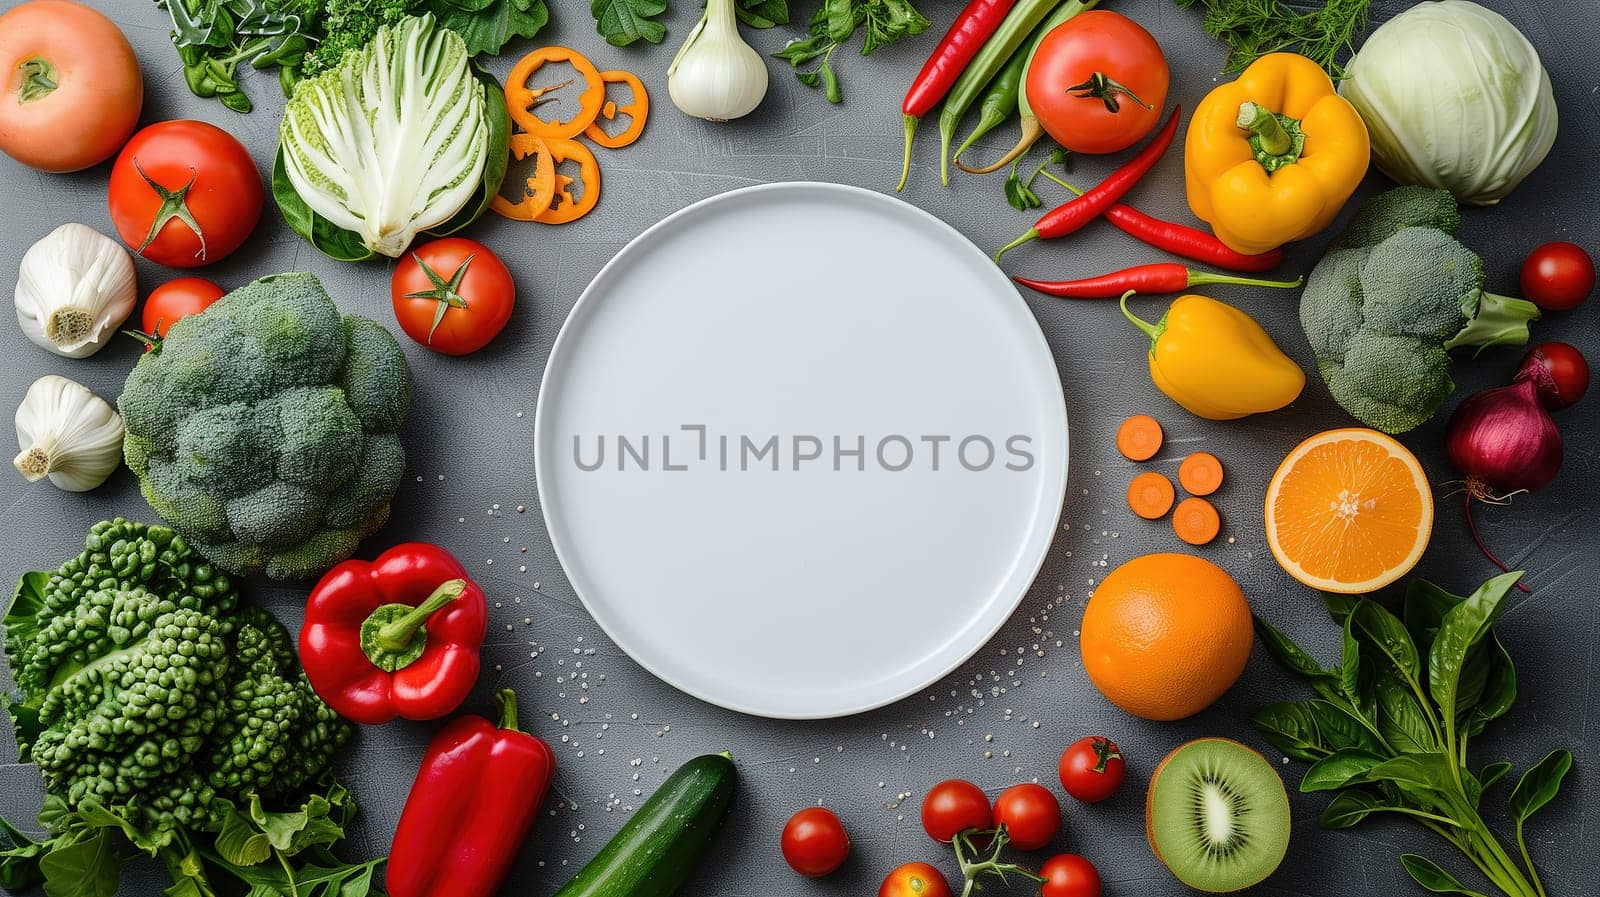 A table displaying a diverse assortment of fresh vegetables, including tomatoes, cucumbers, bell peppers, carrots, broccoli, spinach, and more. The colorful and nutritious veggies are neatly arranged and ready for consumption.